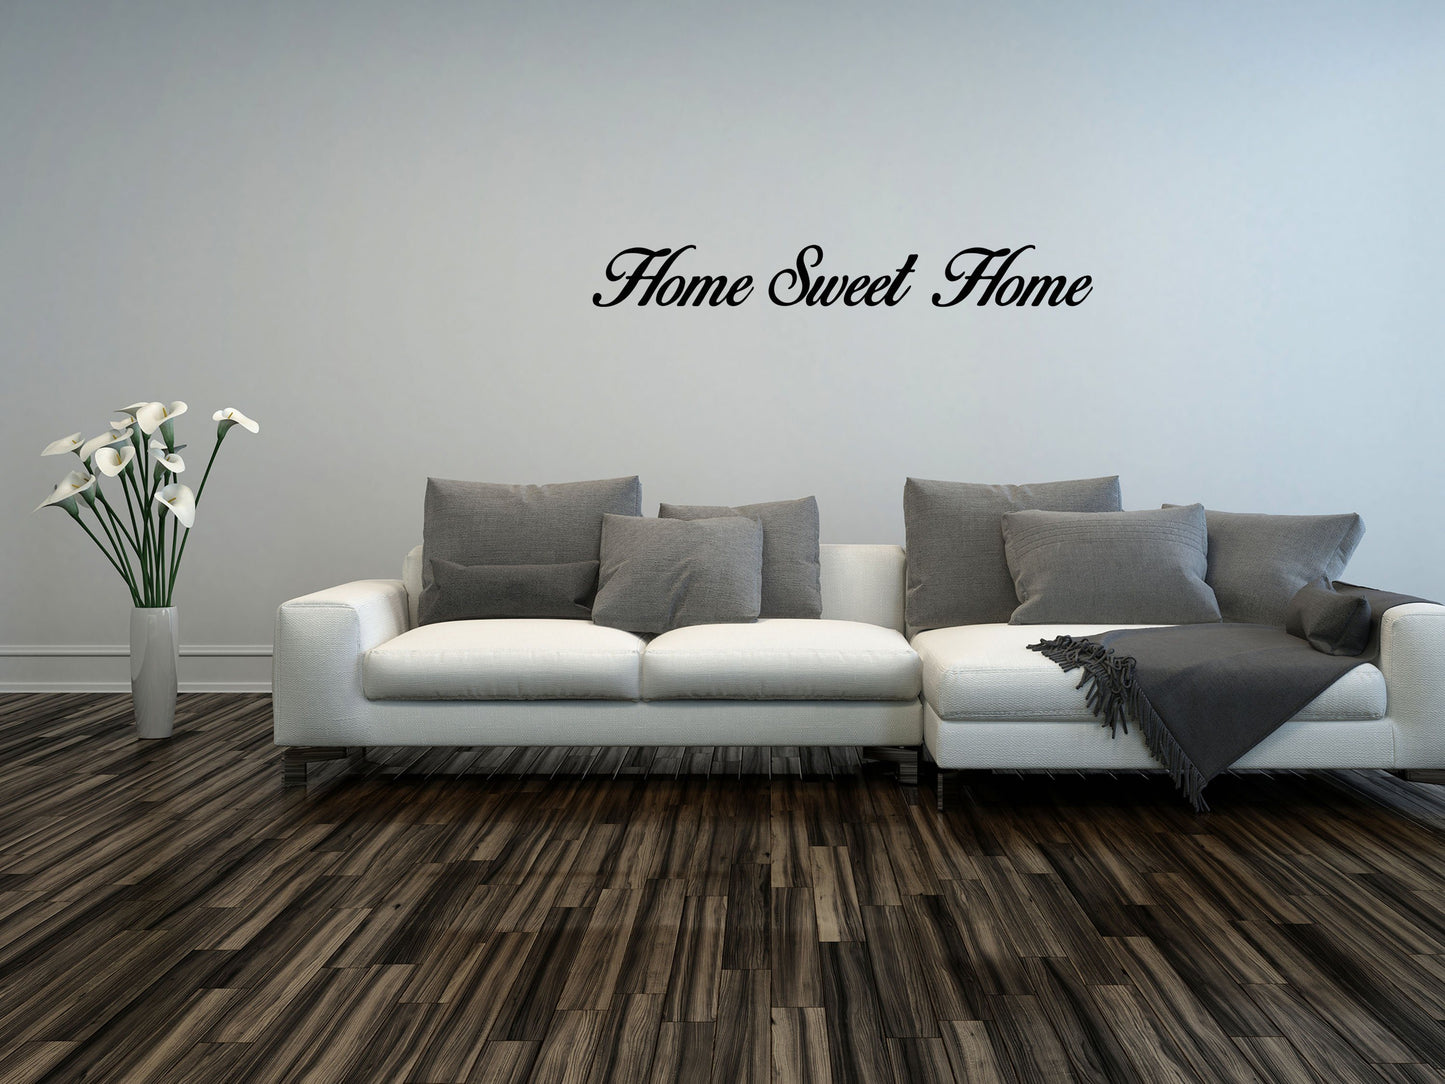 Home Sweet Home - Larger Size Vinyl Wall Decal Inspirational Wall Signs 